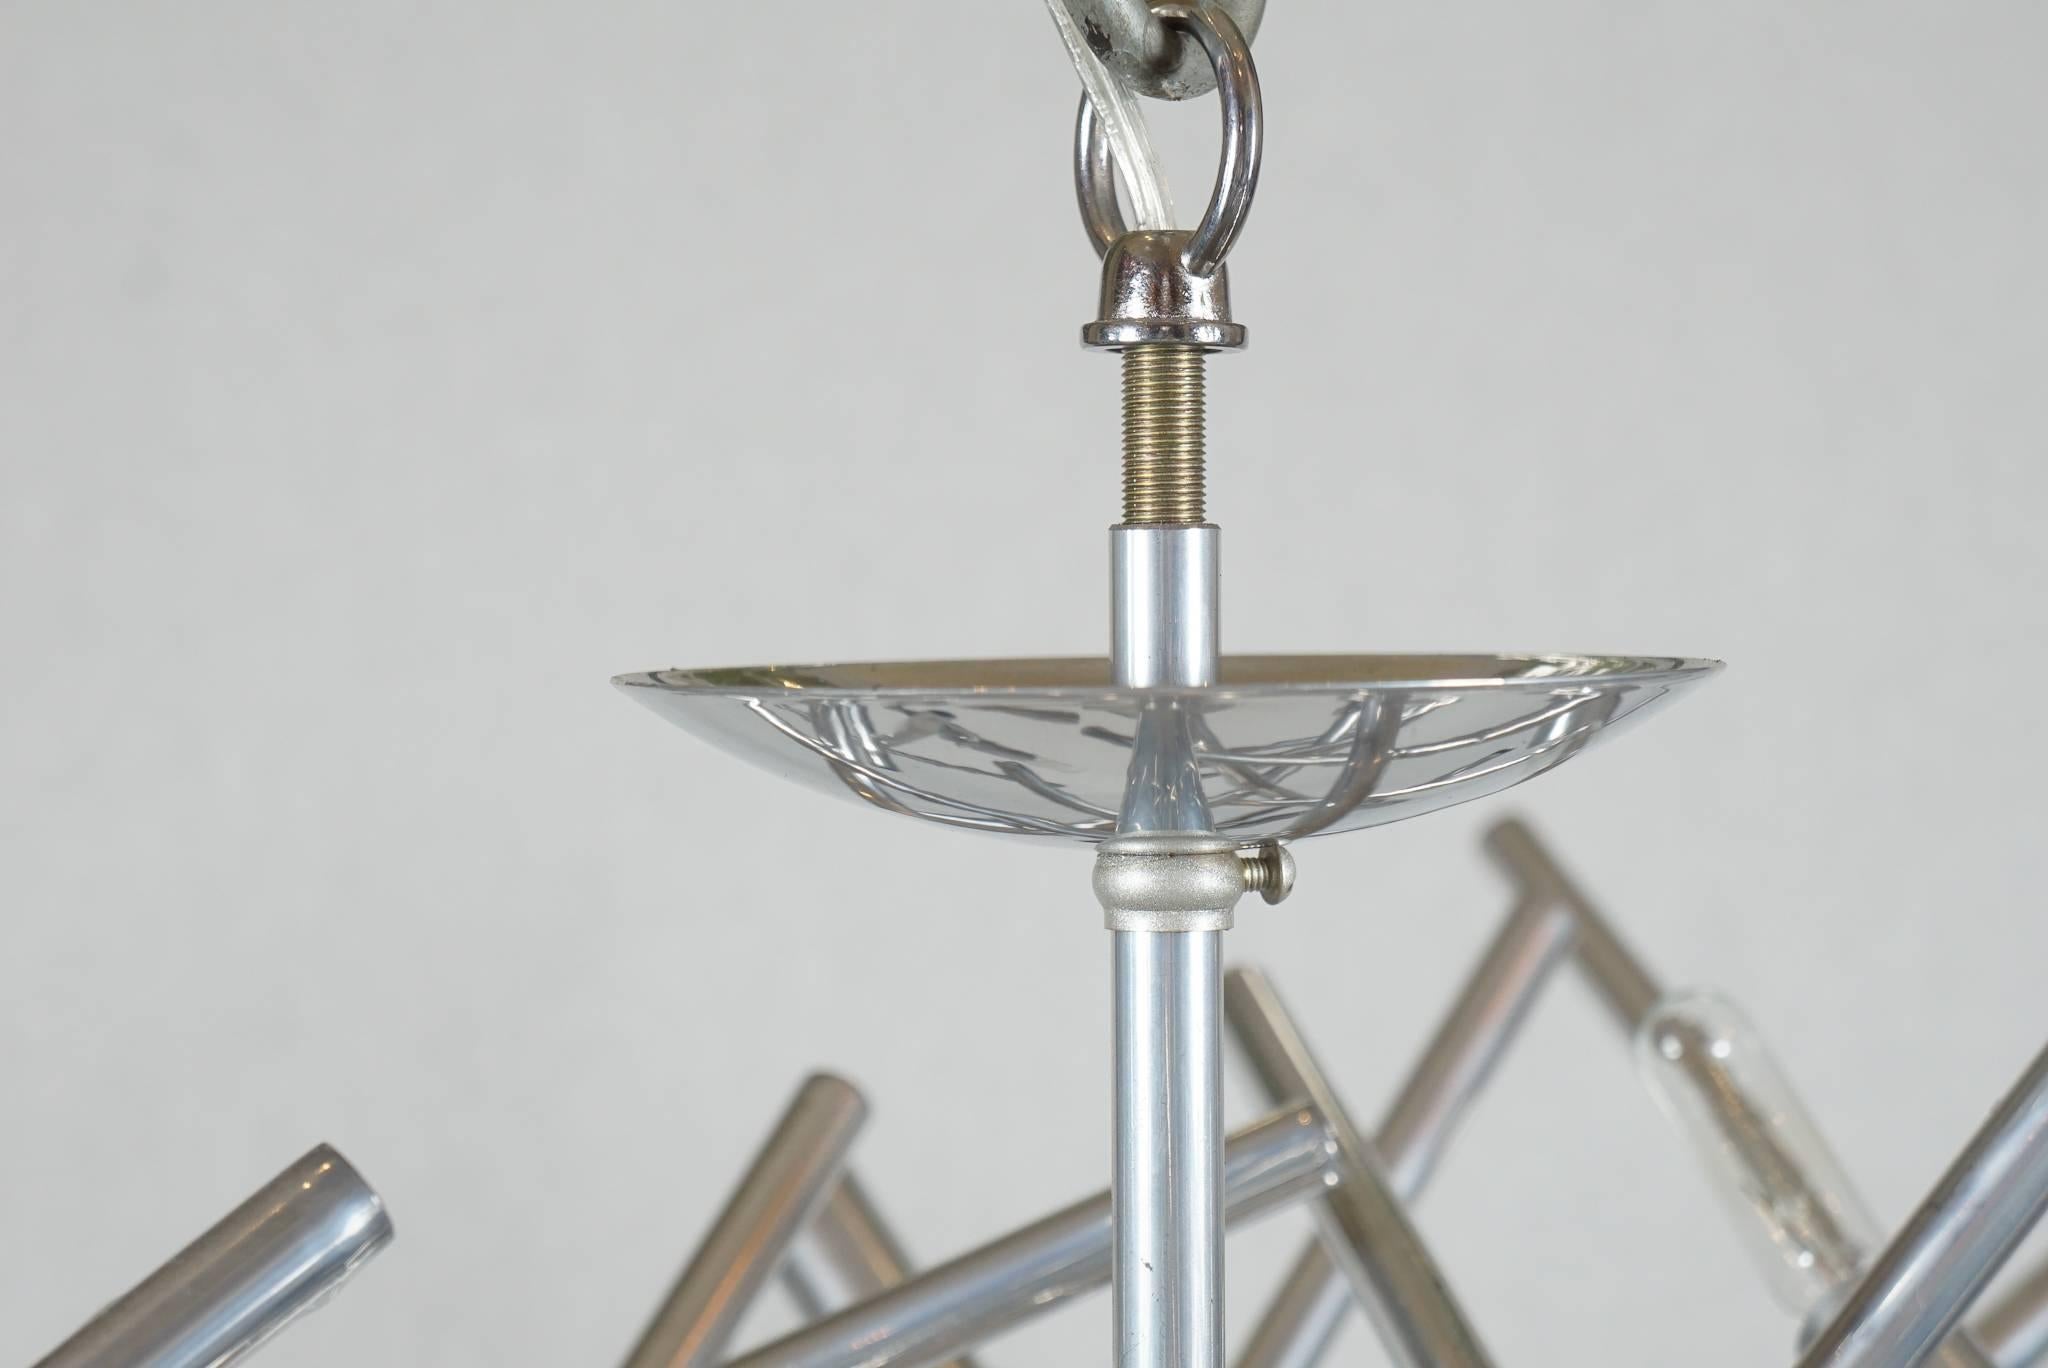 American Custom Angular Momentum Chandelier with a Polished Nickel Finish by Lou Blass For Sale